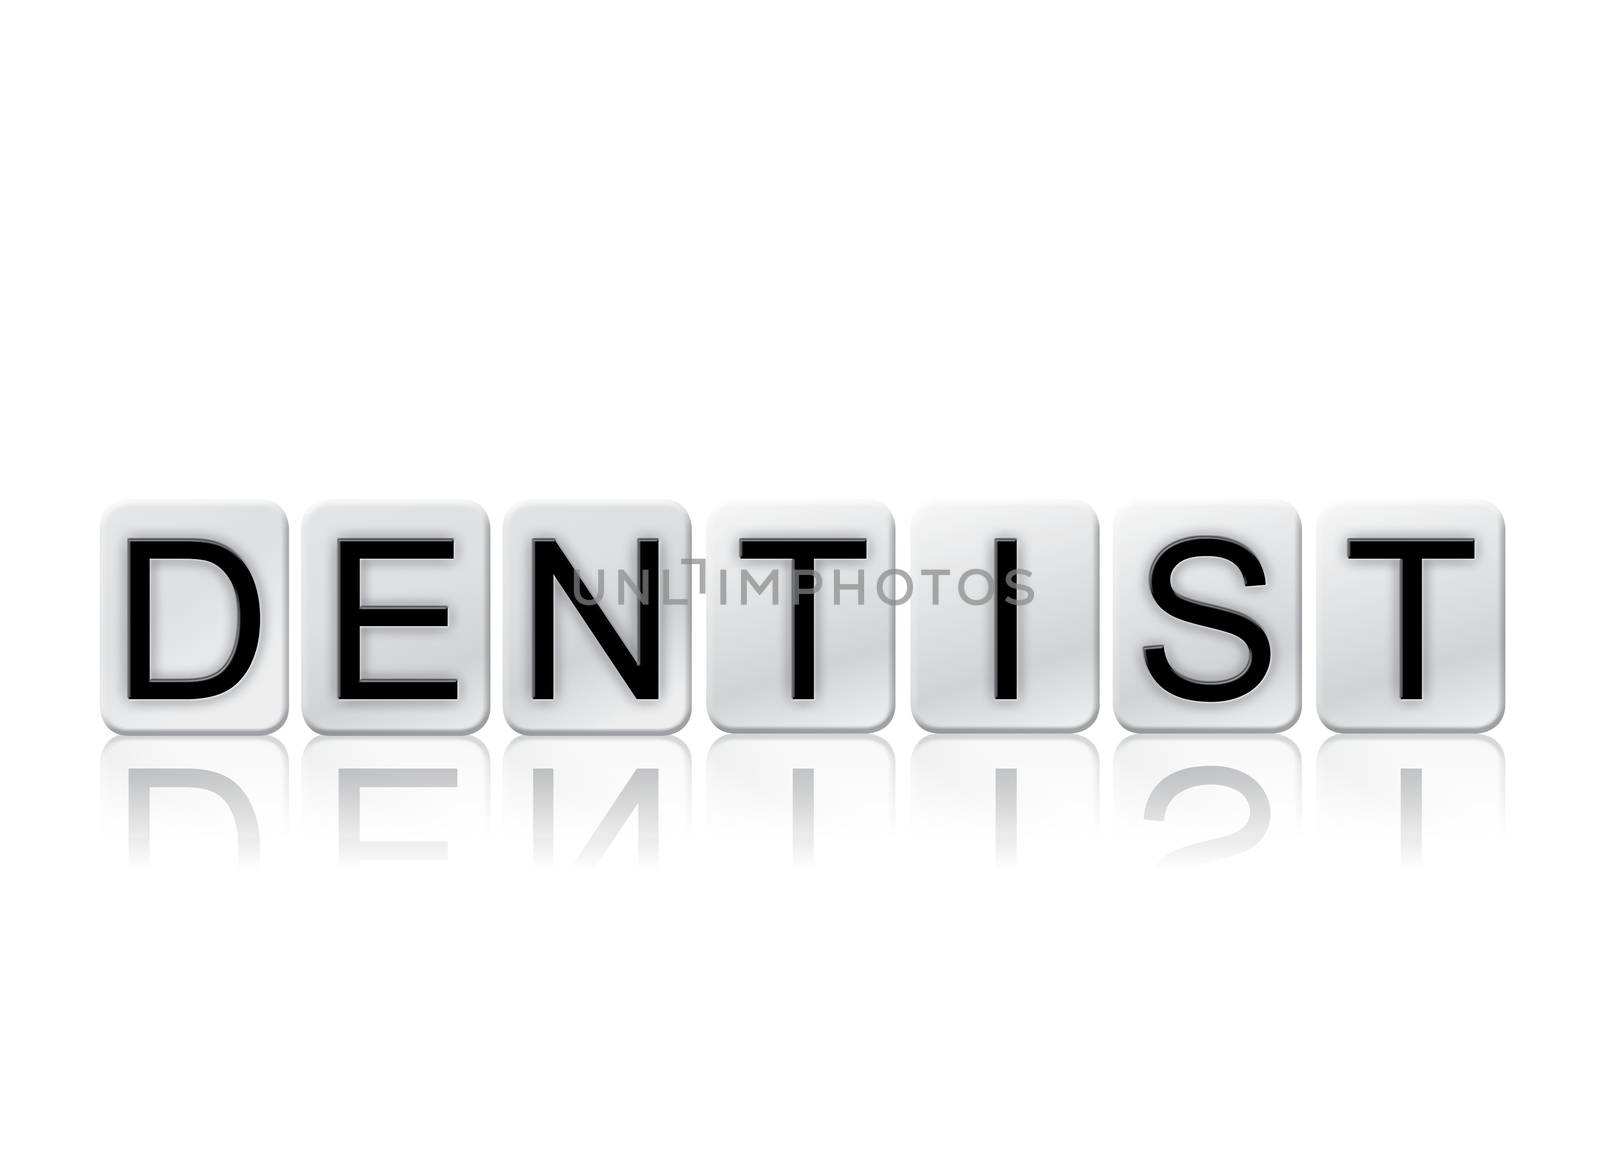 The word "Dentist" written in tile letters isolated on a white background.